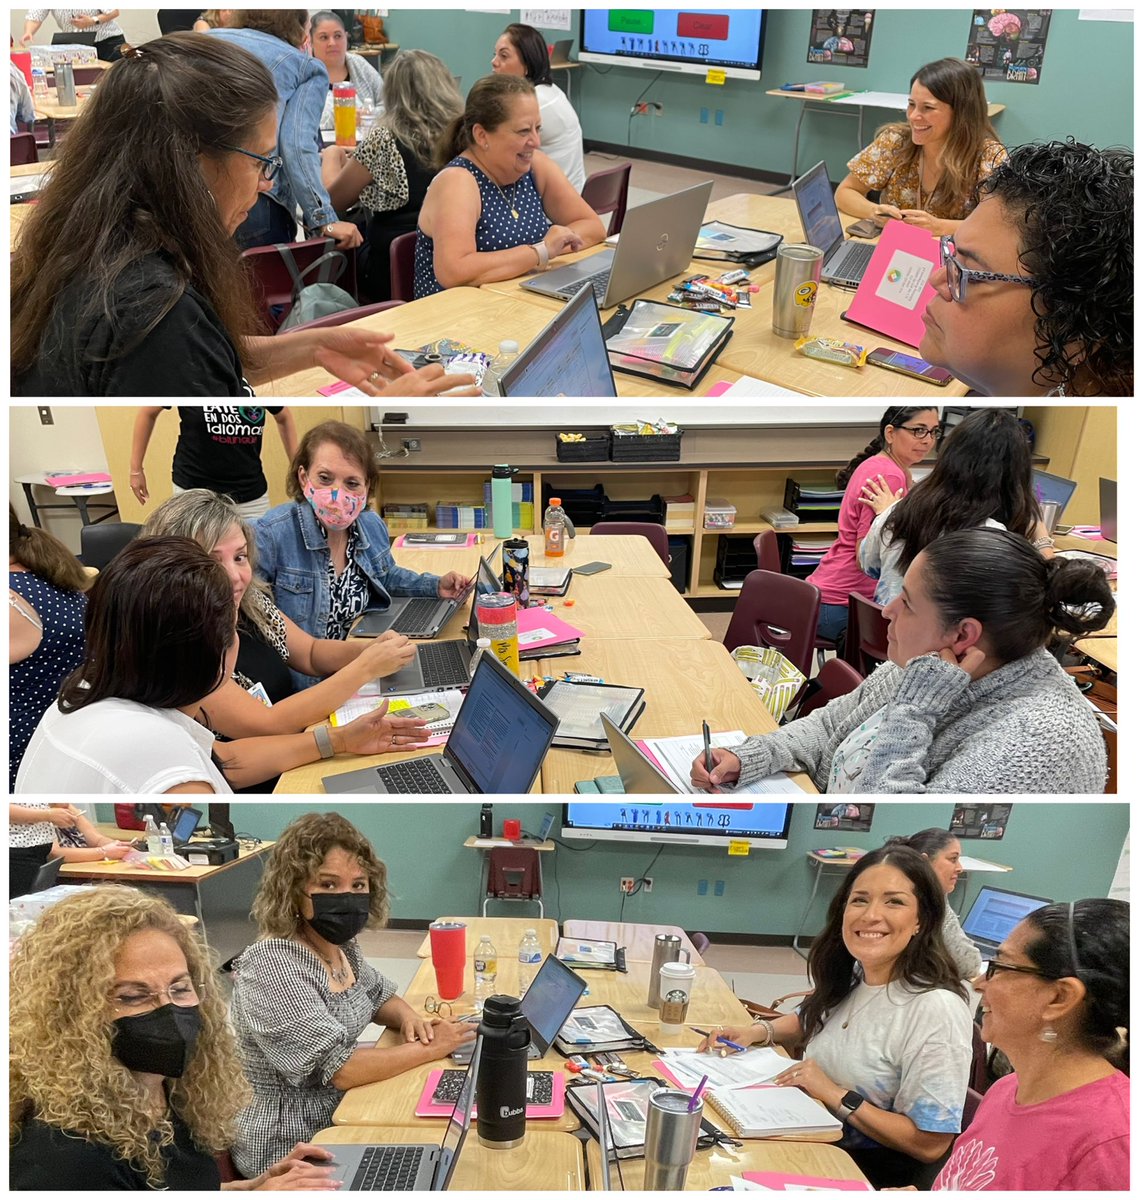 Incredible day with @LamarCISD K-2 #DL Ts! These ladies were on 🔥🔥🔥 Like “iron sharpens iron” they brought out the best in each other! Thank you ladies!It’s always a pleasure working with you! 💚💙 @lcisddlp @GStewartkooper @cprince787 @DrSMercuri